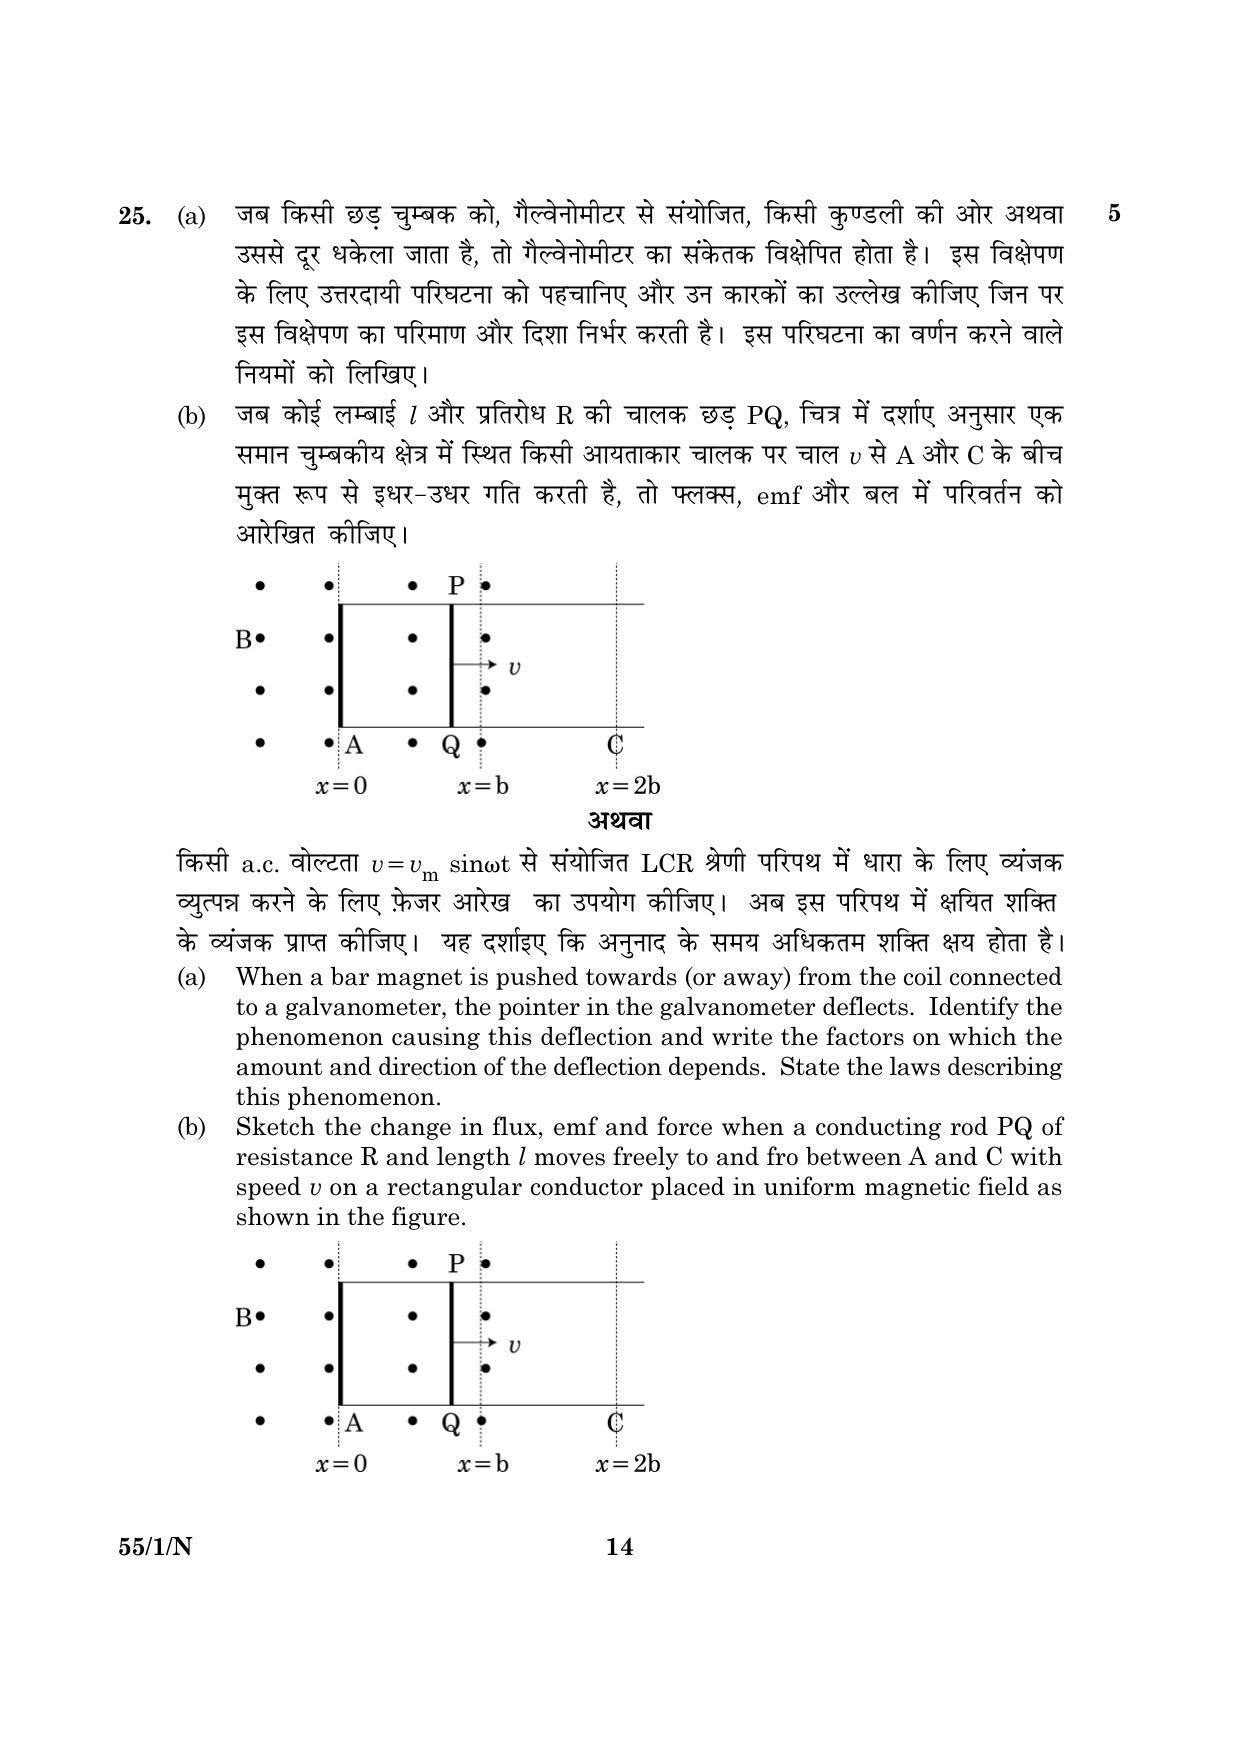 CBSE Class 12 055 Set 1 N Physics Theory 2016 Question Paper - Page 14